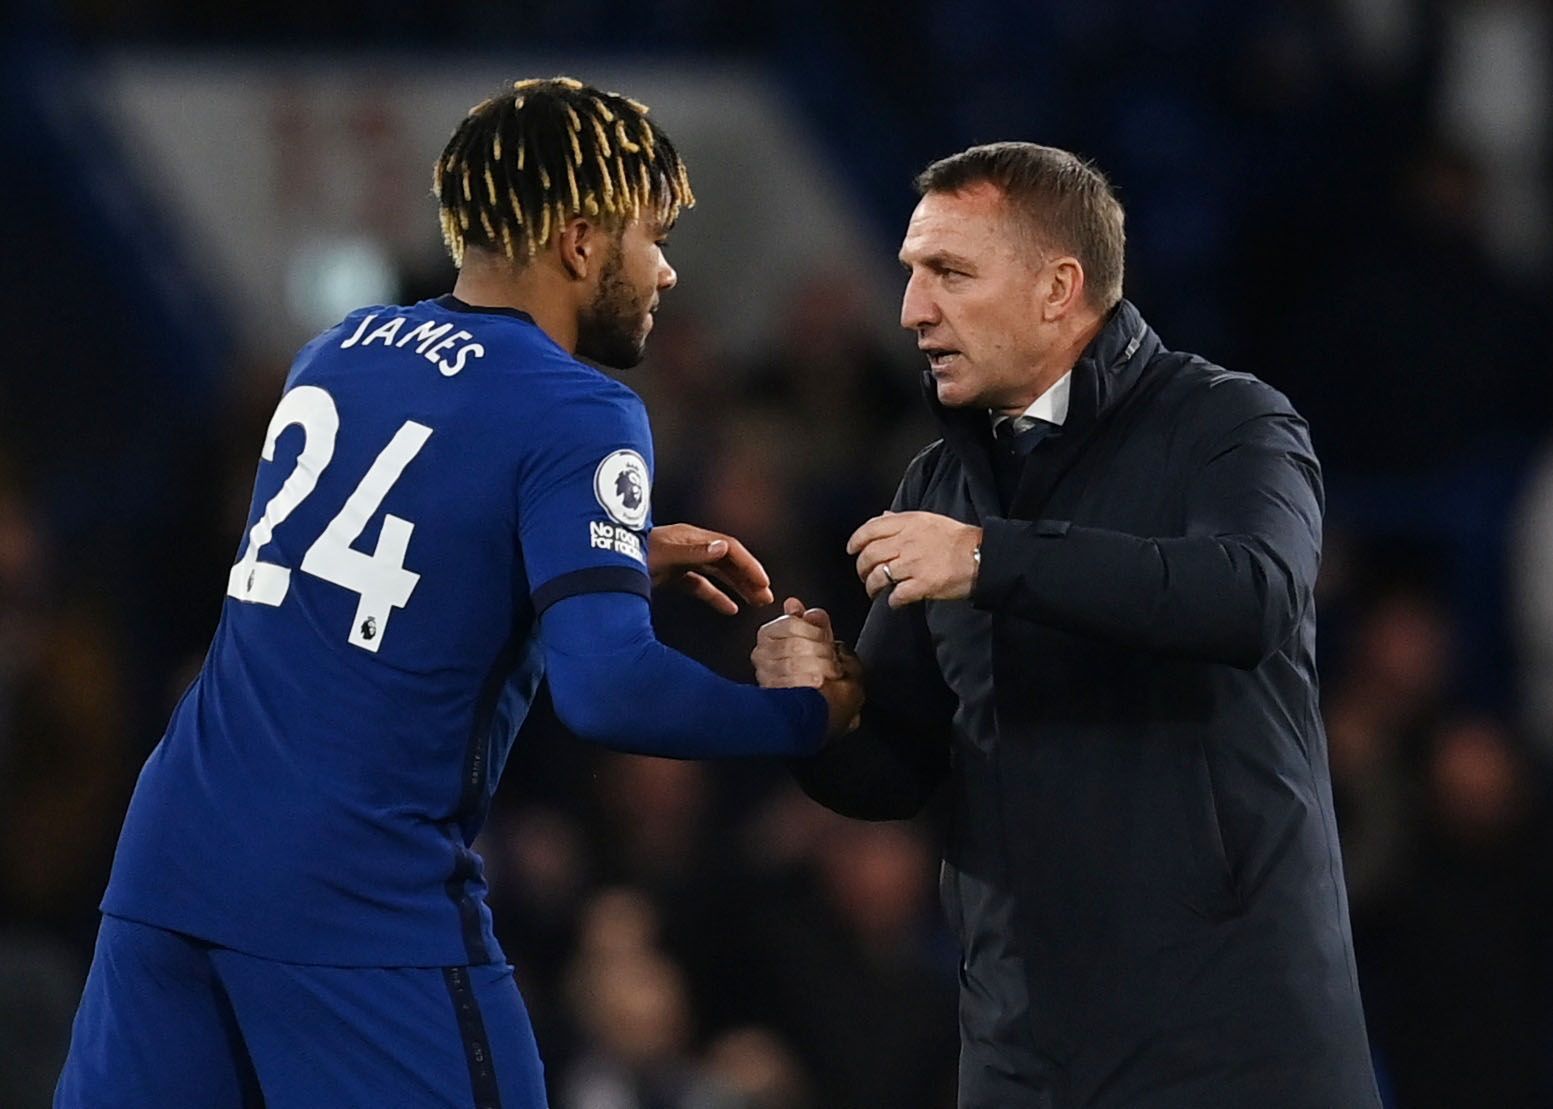 Soccer Football - Premier League - Chelsea v Leicester City - Stamford Bridge, London, Britain - May 18, 2021 Leicester City manager Brendan Rodgers shakes hands with Chelsea's Reece James after the match Pool via REUTERS/Glyn Kirk EDITORIAL USE ONLY. No use with unauthorized audio, video, data, fixture lists, club/league logos or 'live' services. Online in-match use limited to 75 images, no video emulation. No use in betting, games or single club /league/player publications.  Please contact you